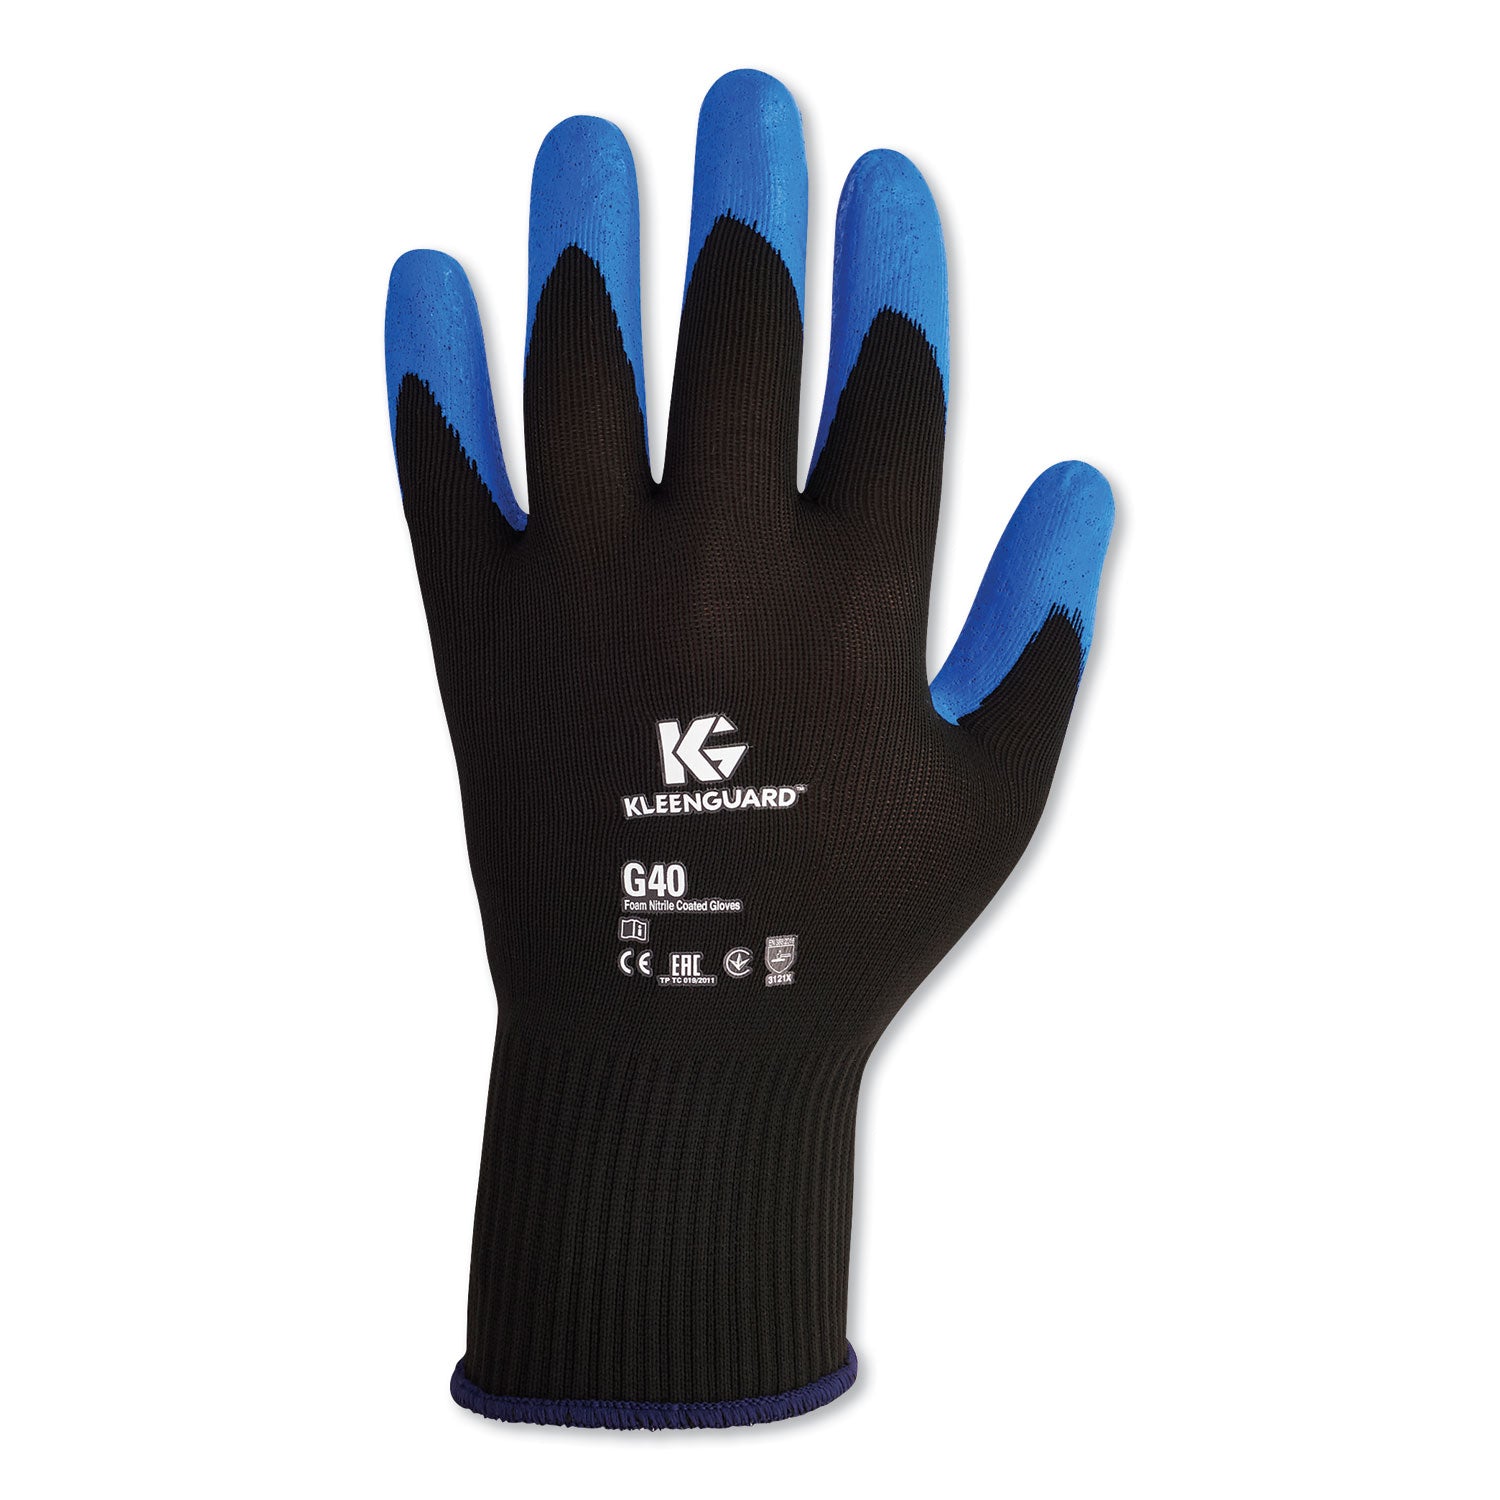 g40-foam-nitrile-coated-gloves-250-mm-length-x-large-size-10-blue-12-pairs_kcc40228 - 1